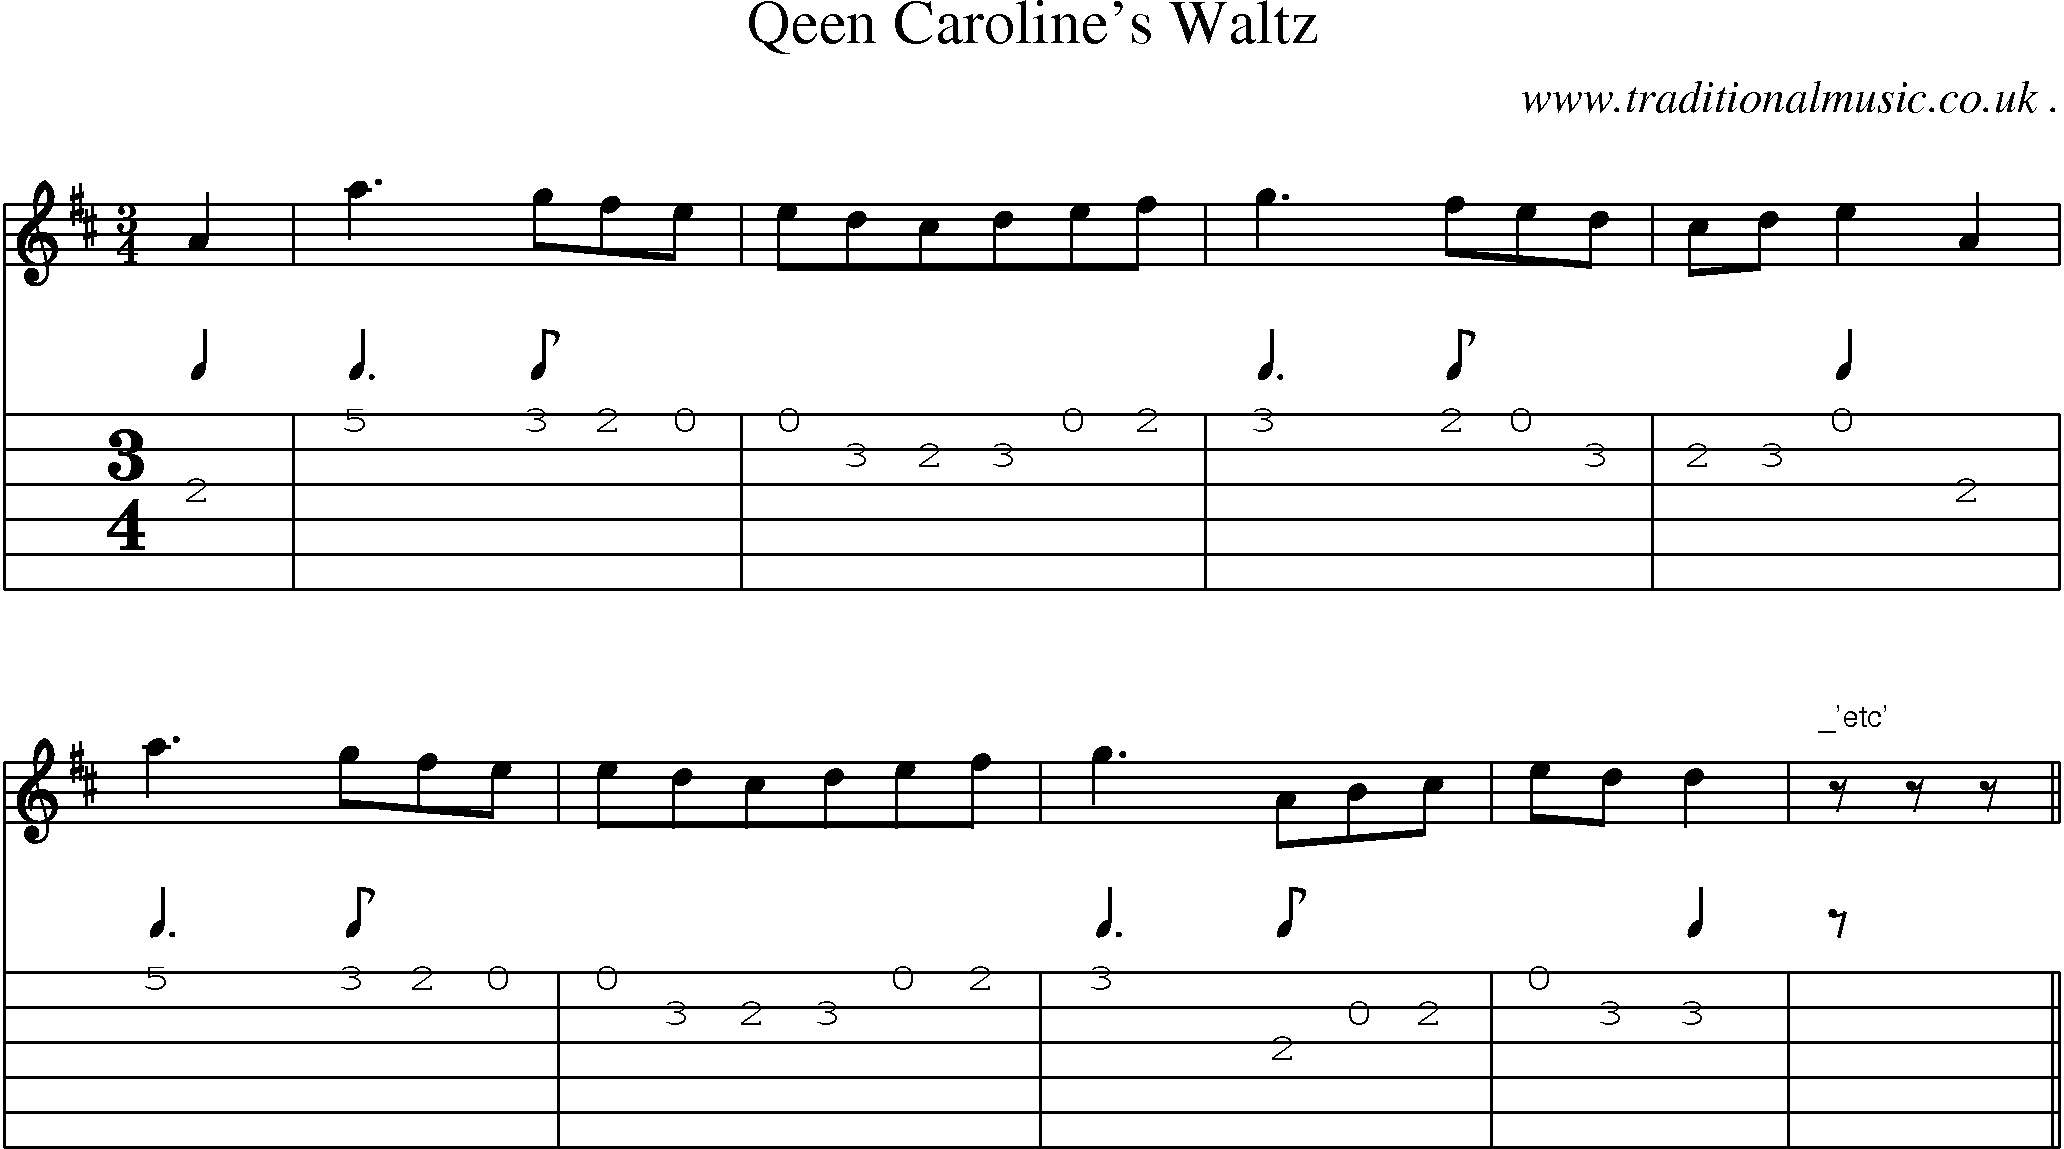 Sheet-Music and Guitar Tabs for Qeen Carolines Waltz